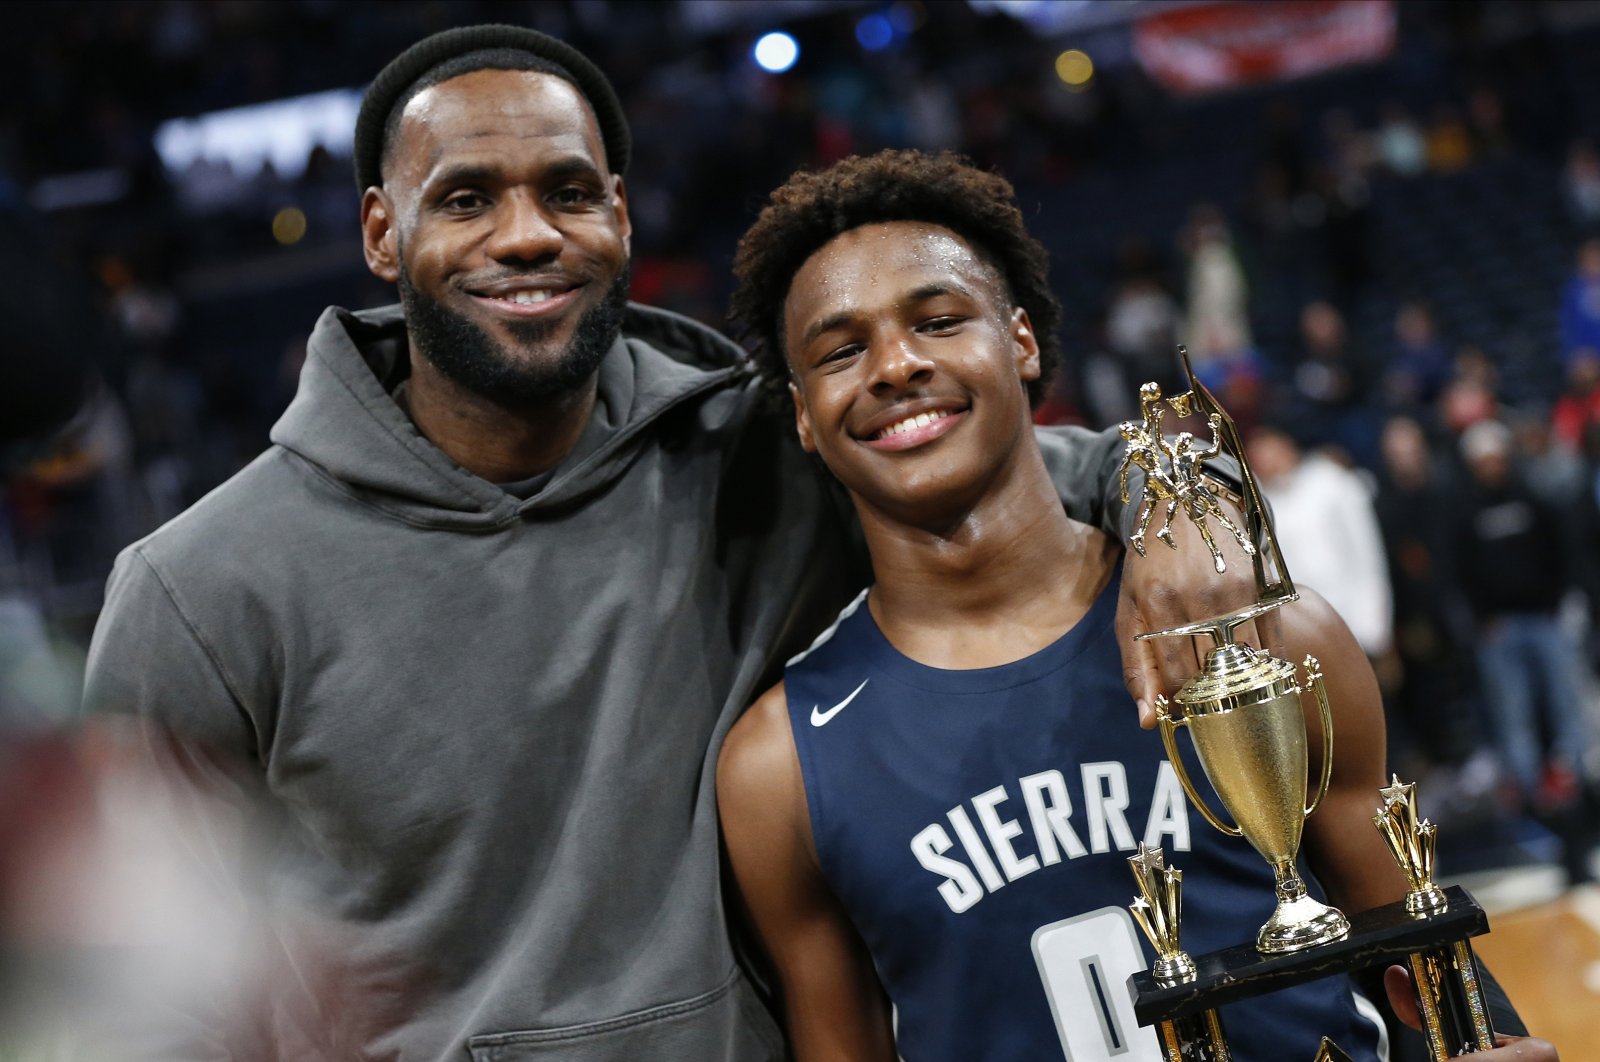 Los Angeles Lakers forward LeBron James (L) poses with his son Bronny after Sierra Canyon defeated Akron St. Vincent-St. Mary in a high school basketball game, Columbus, Ohio, U.S., Dec. 14, 2019. (AP Photo)